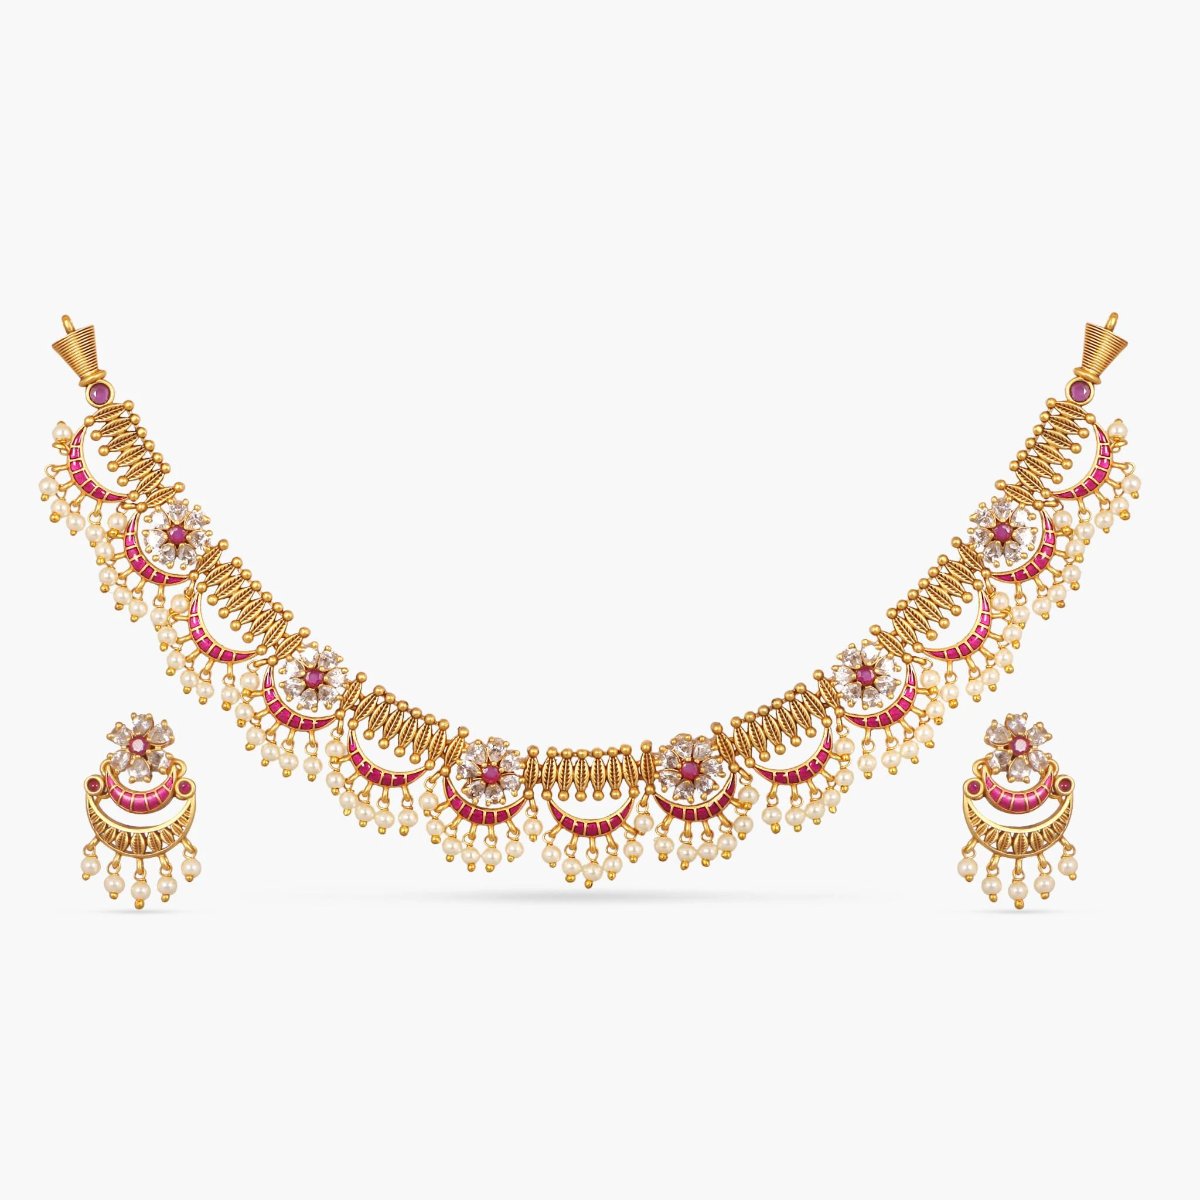 A picture of an Indian artificial gold plated necklace set with floral designs,Cubic Zirconia and red gemstones , and pearl embellishments.